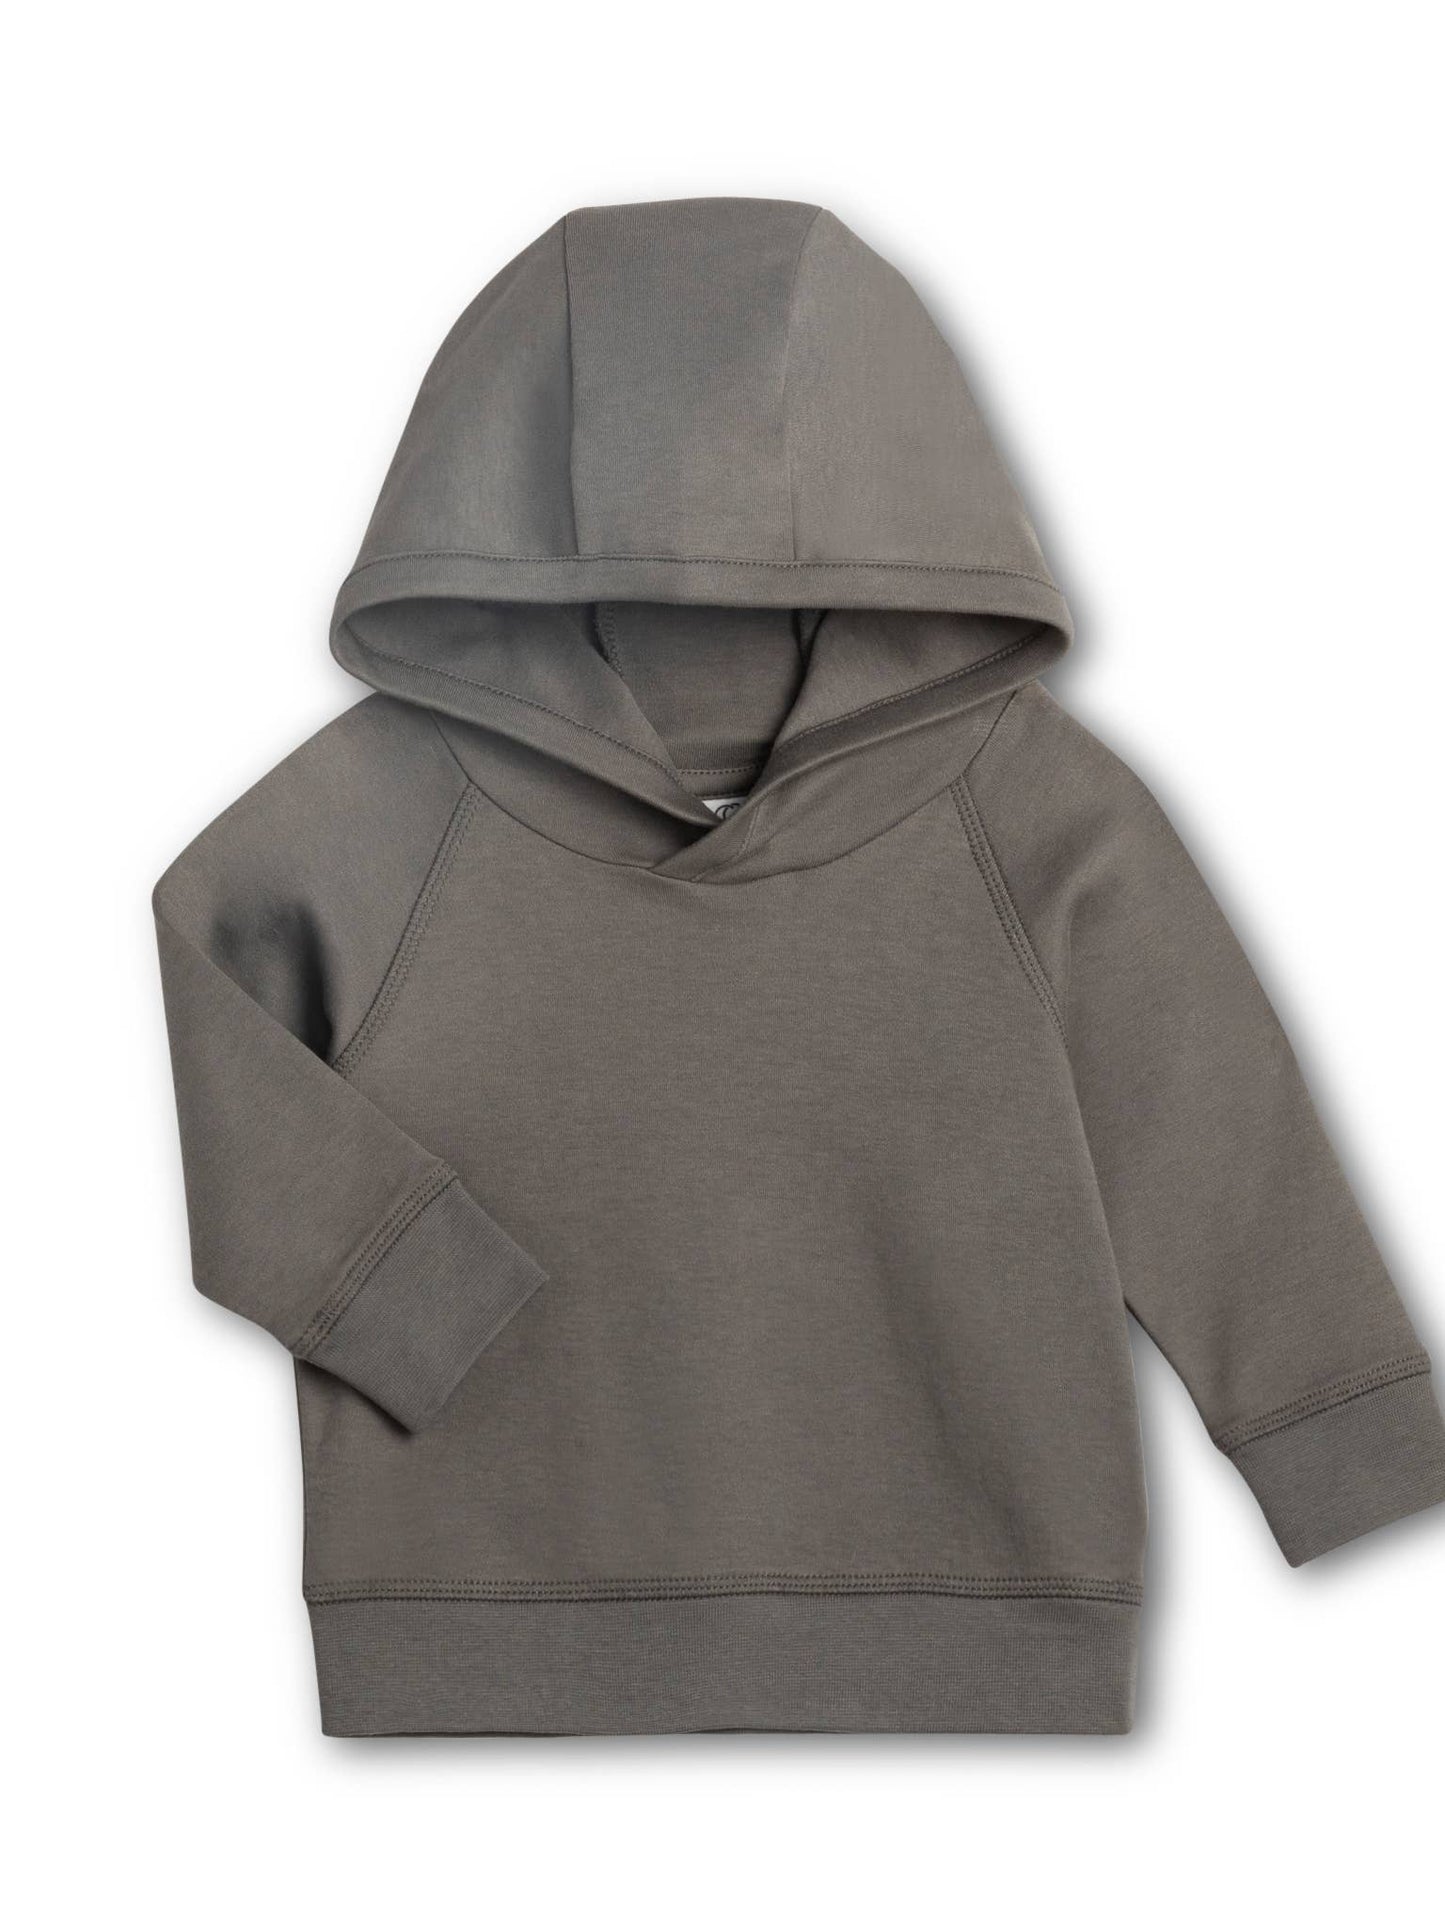 Colored Organics - Organic Baby and Kids Madison Hooded Pullover - Pewter